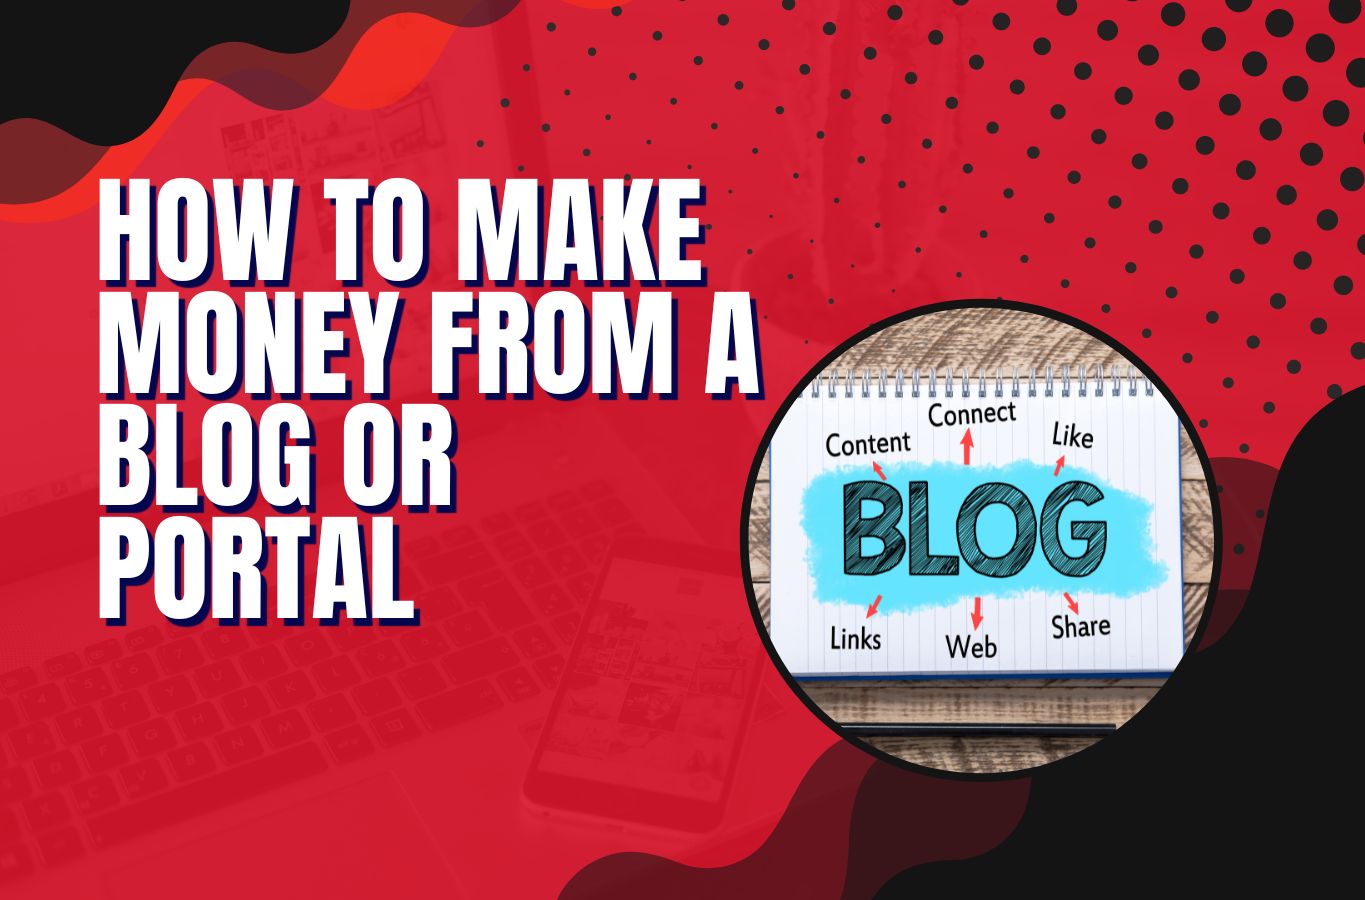 How to make money from a blog or portal?